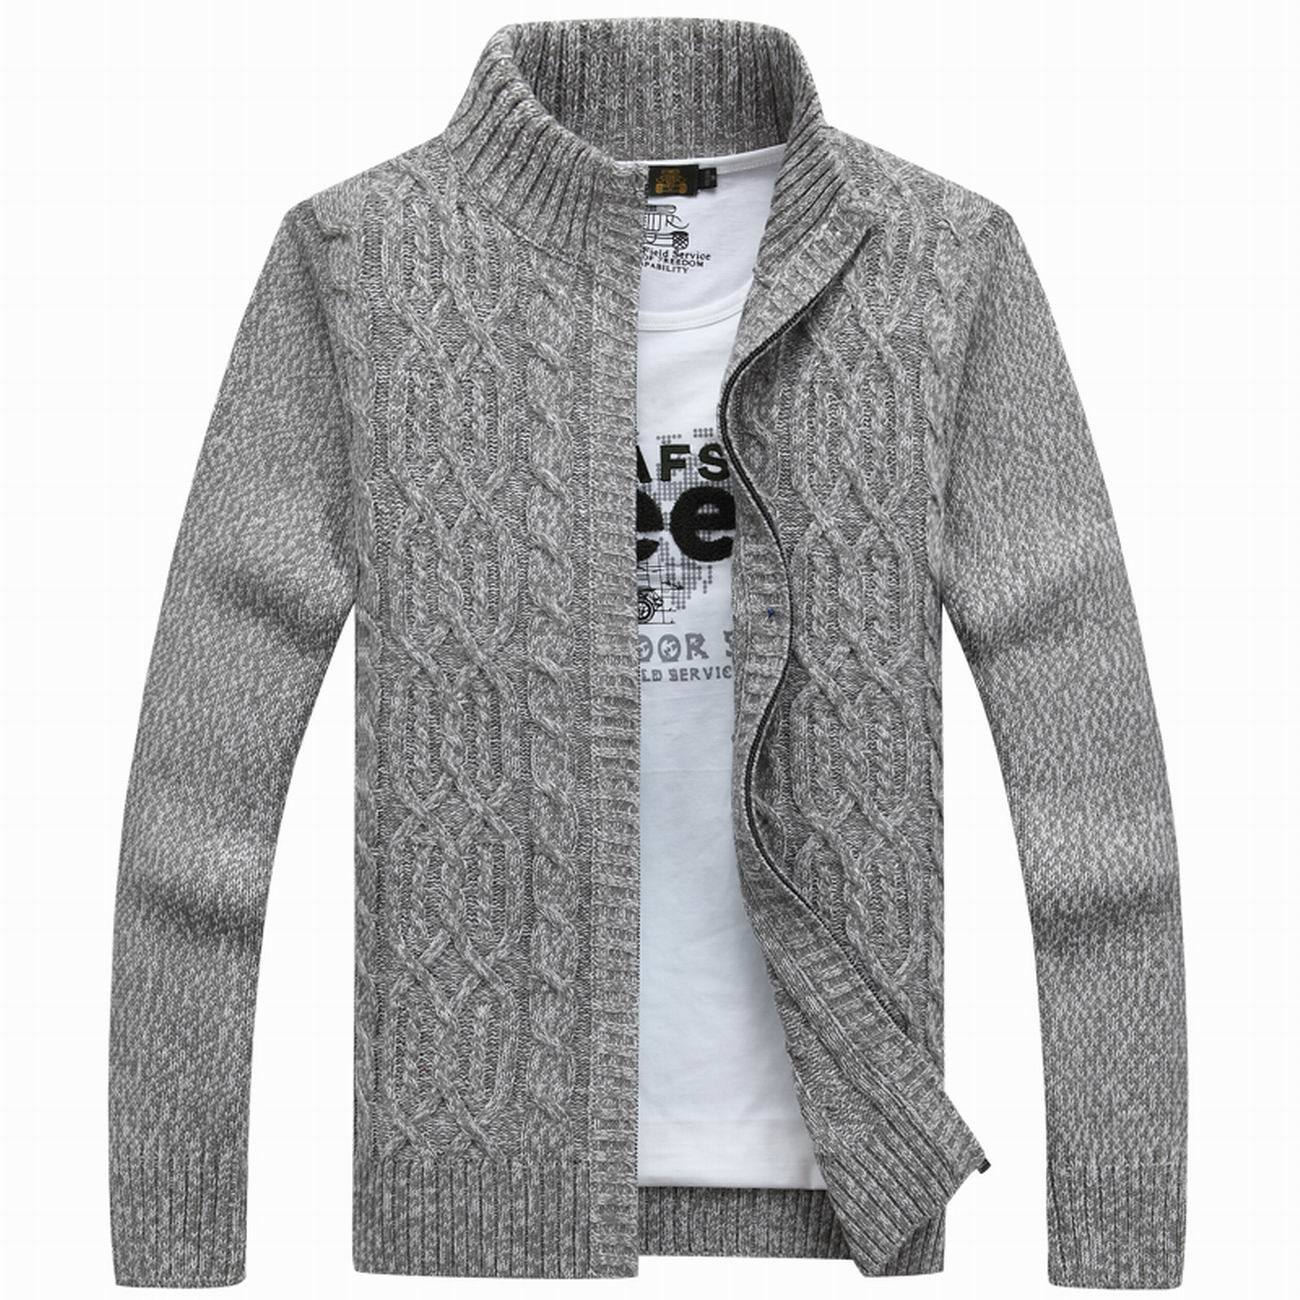 Men's Acrylic and Polyester Zip Down Cardigan Sweater with Flower Pattern